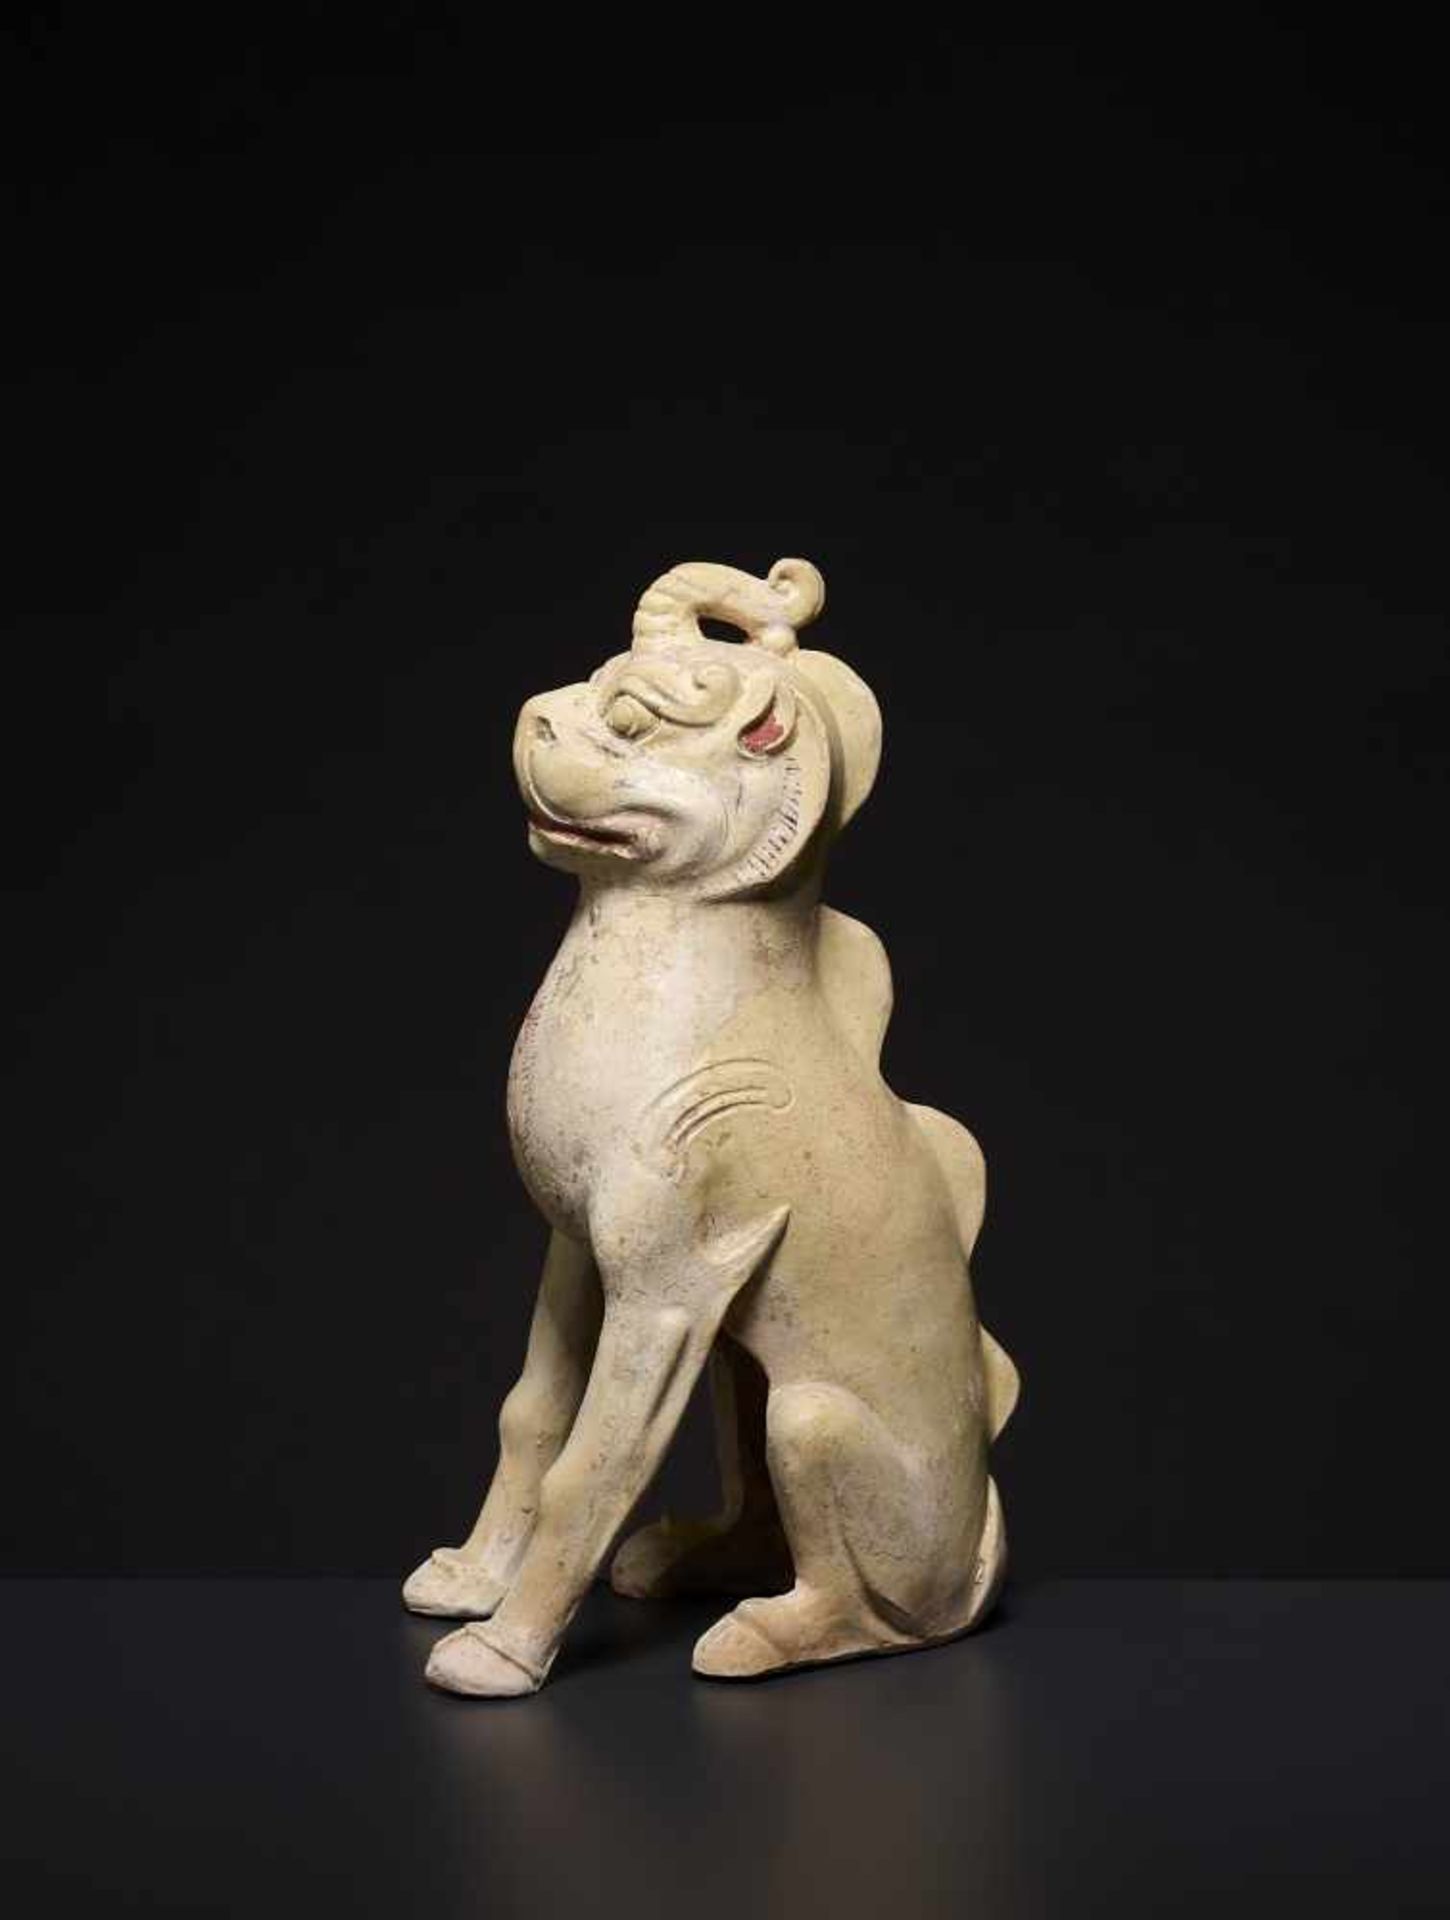 A GLAZED CERAMIC UNICORN, TANG China, 618-907. The pottery statue neatly modelled with the unicorn